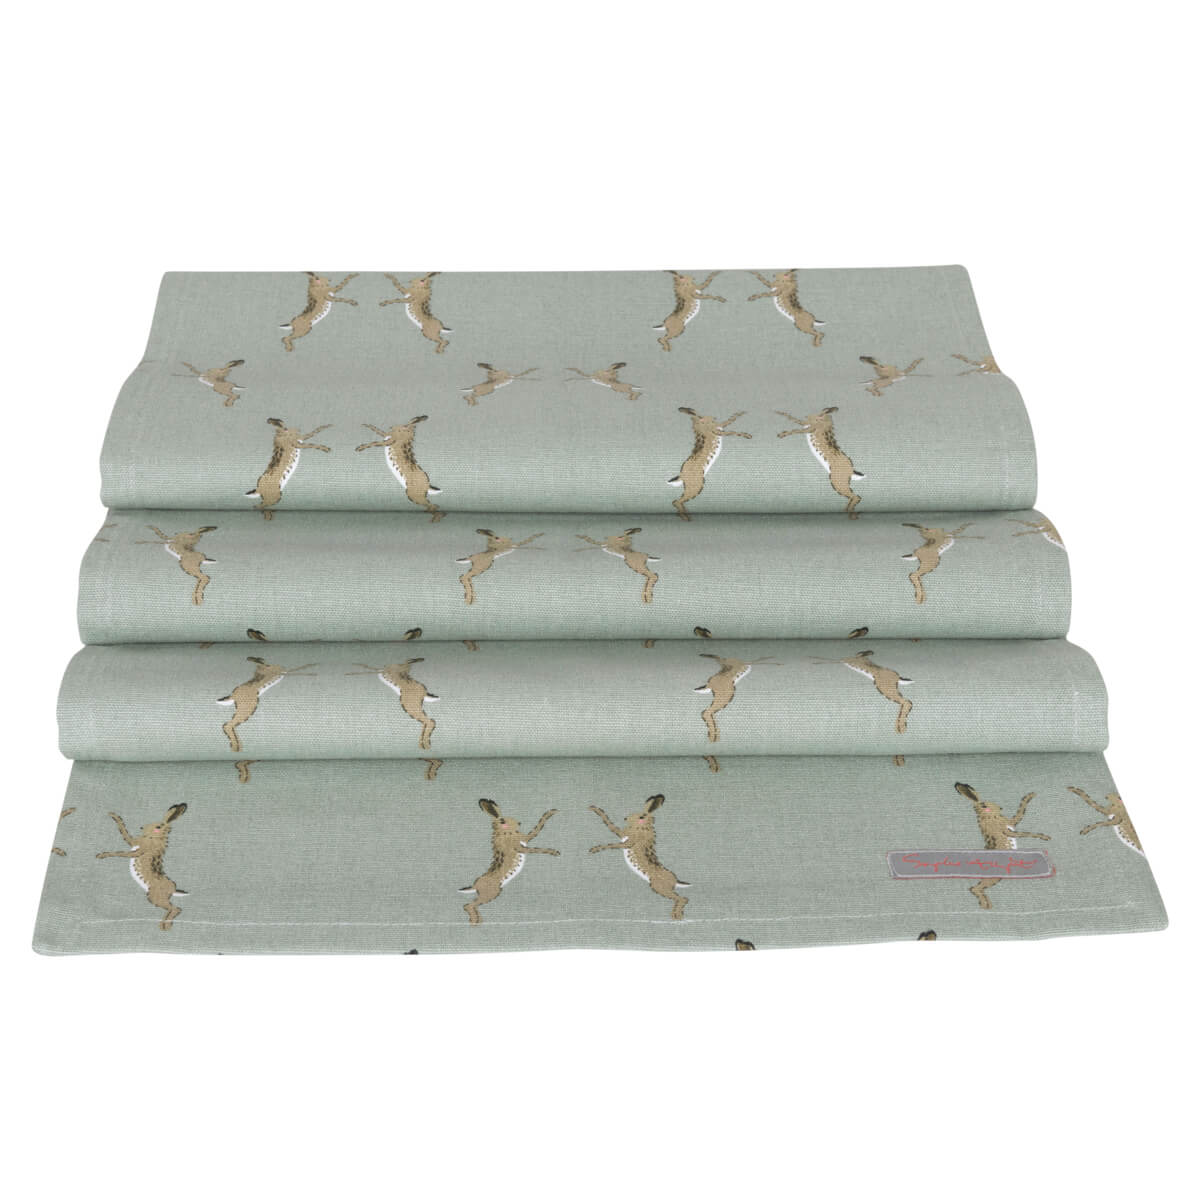 Cotton table setting runner with Sophie Allport's boxing hare print on a duck egg grey ground